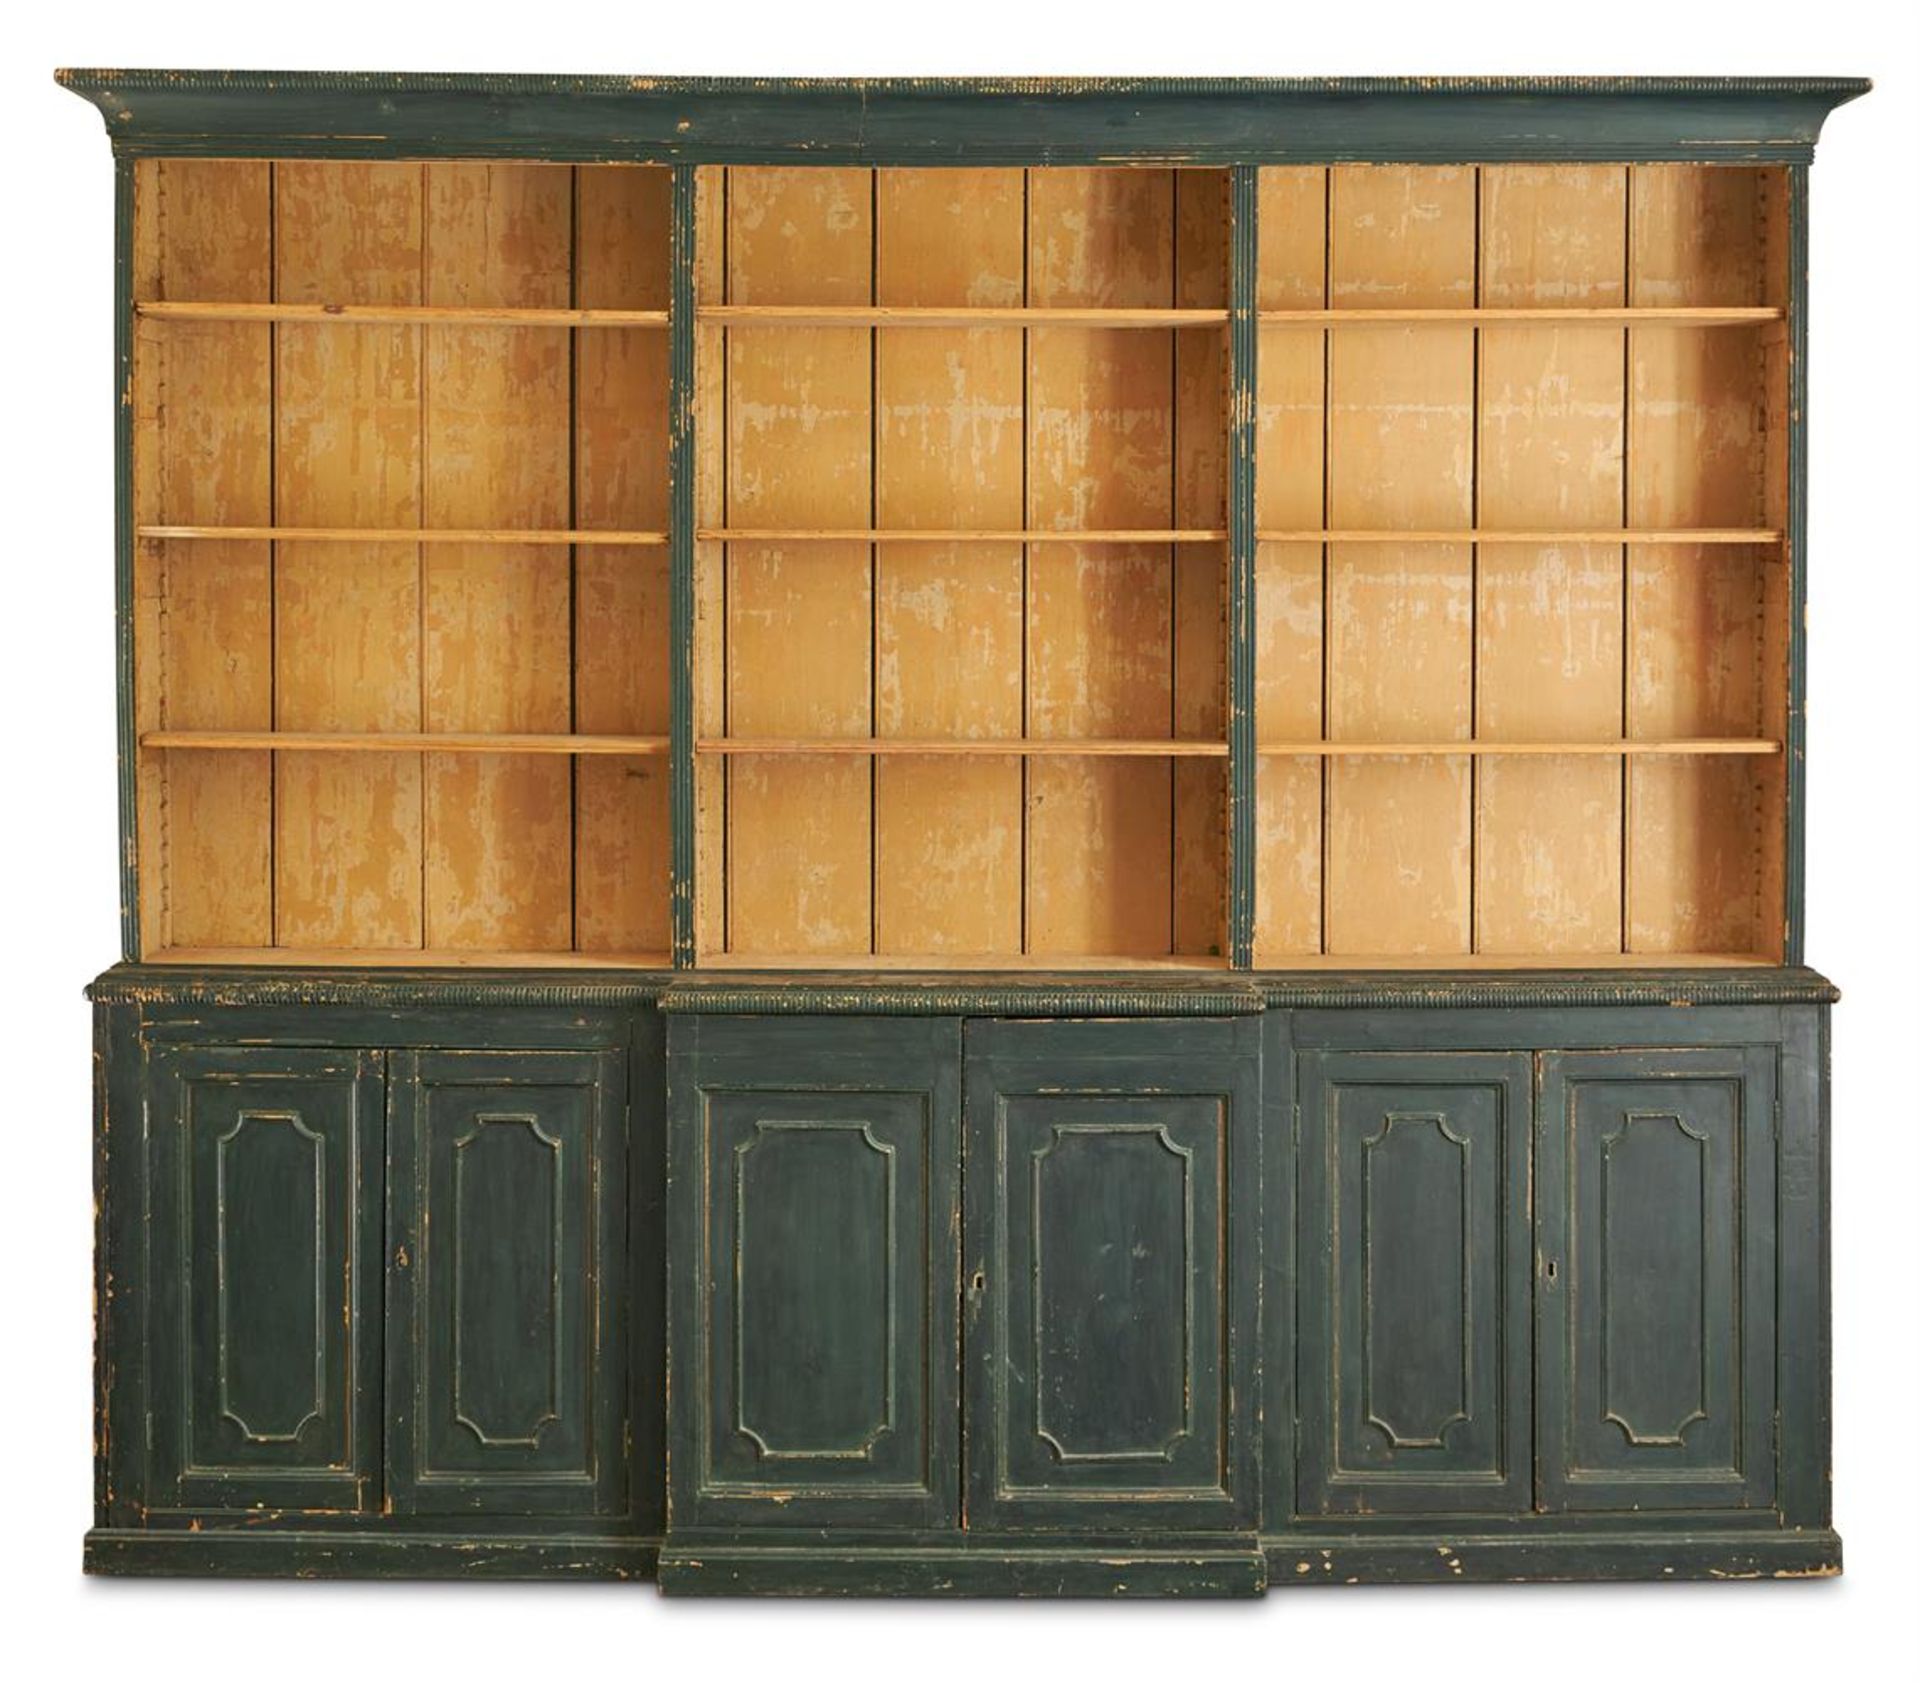 A GEORGE III INDIGO GREEN PAINTED PINE BREAKFRONT BOOKCASE, EARLY 19TH CENTURY